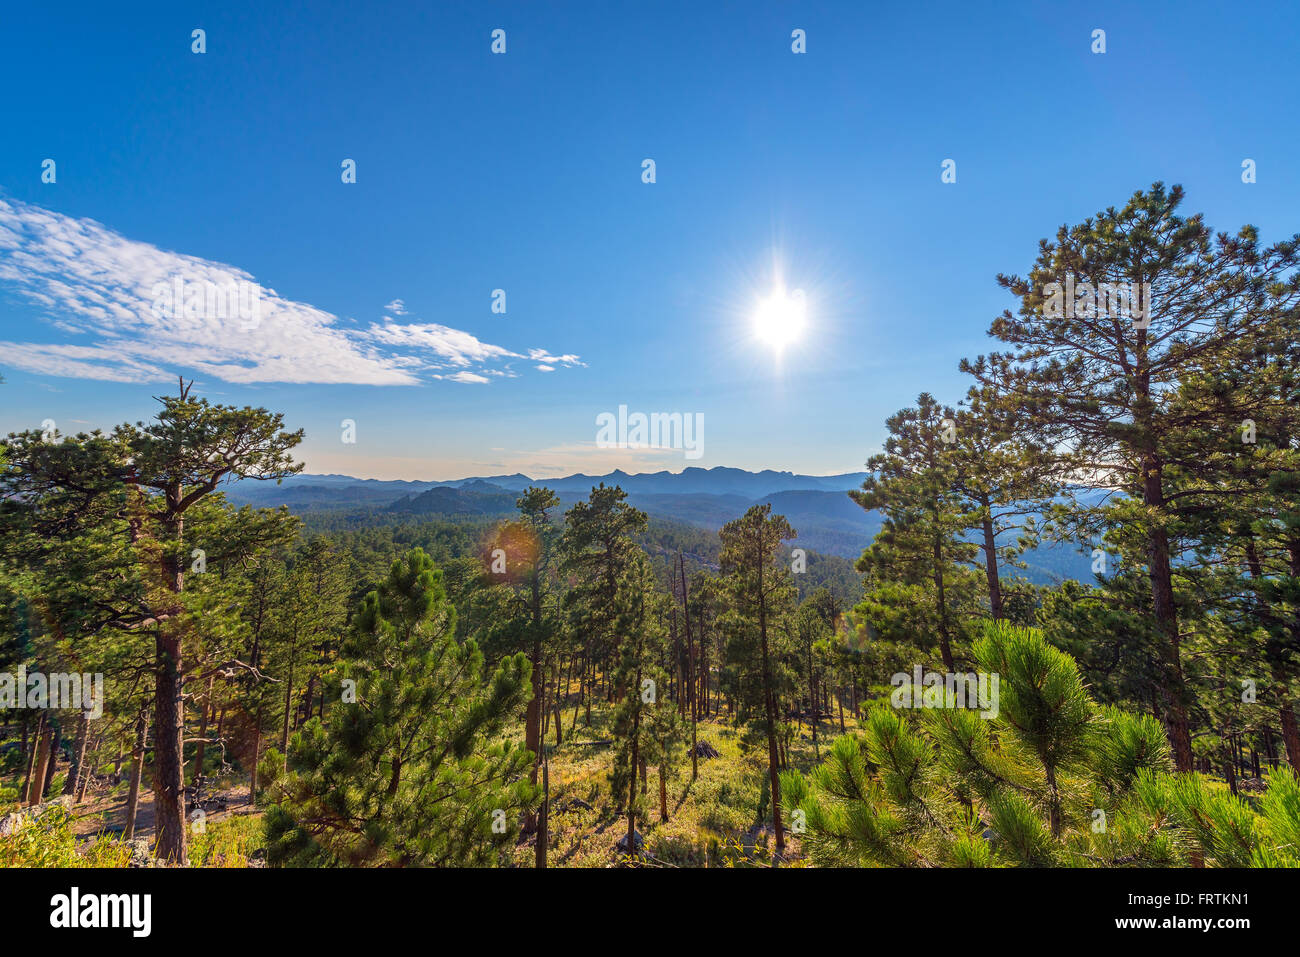 Densely forested landscape in Custer State Park in the Black Hills of South Dakota Stock Photo